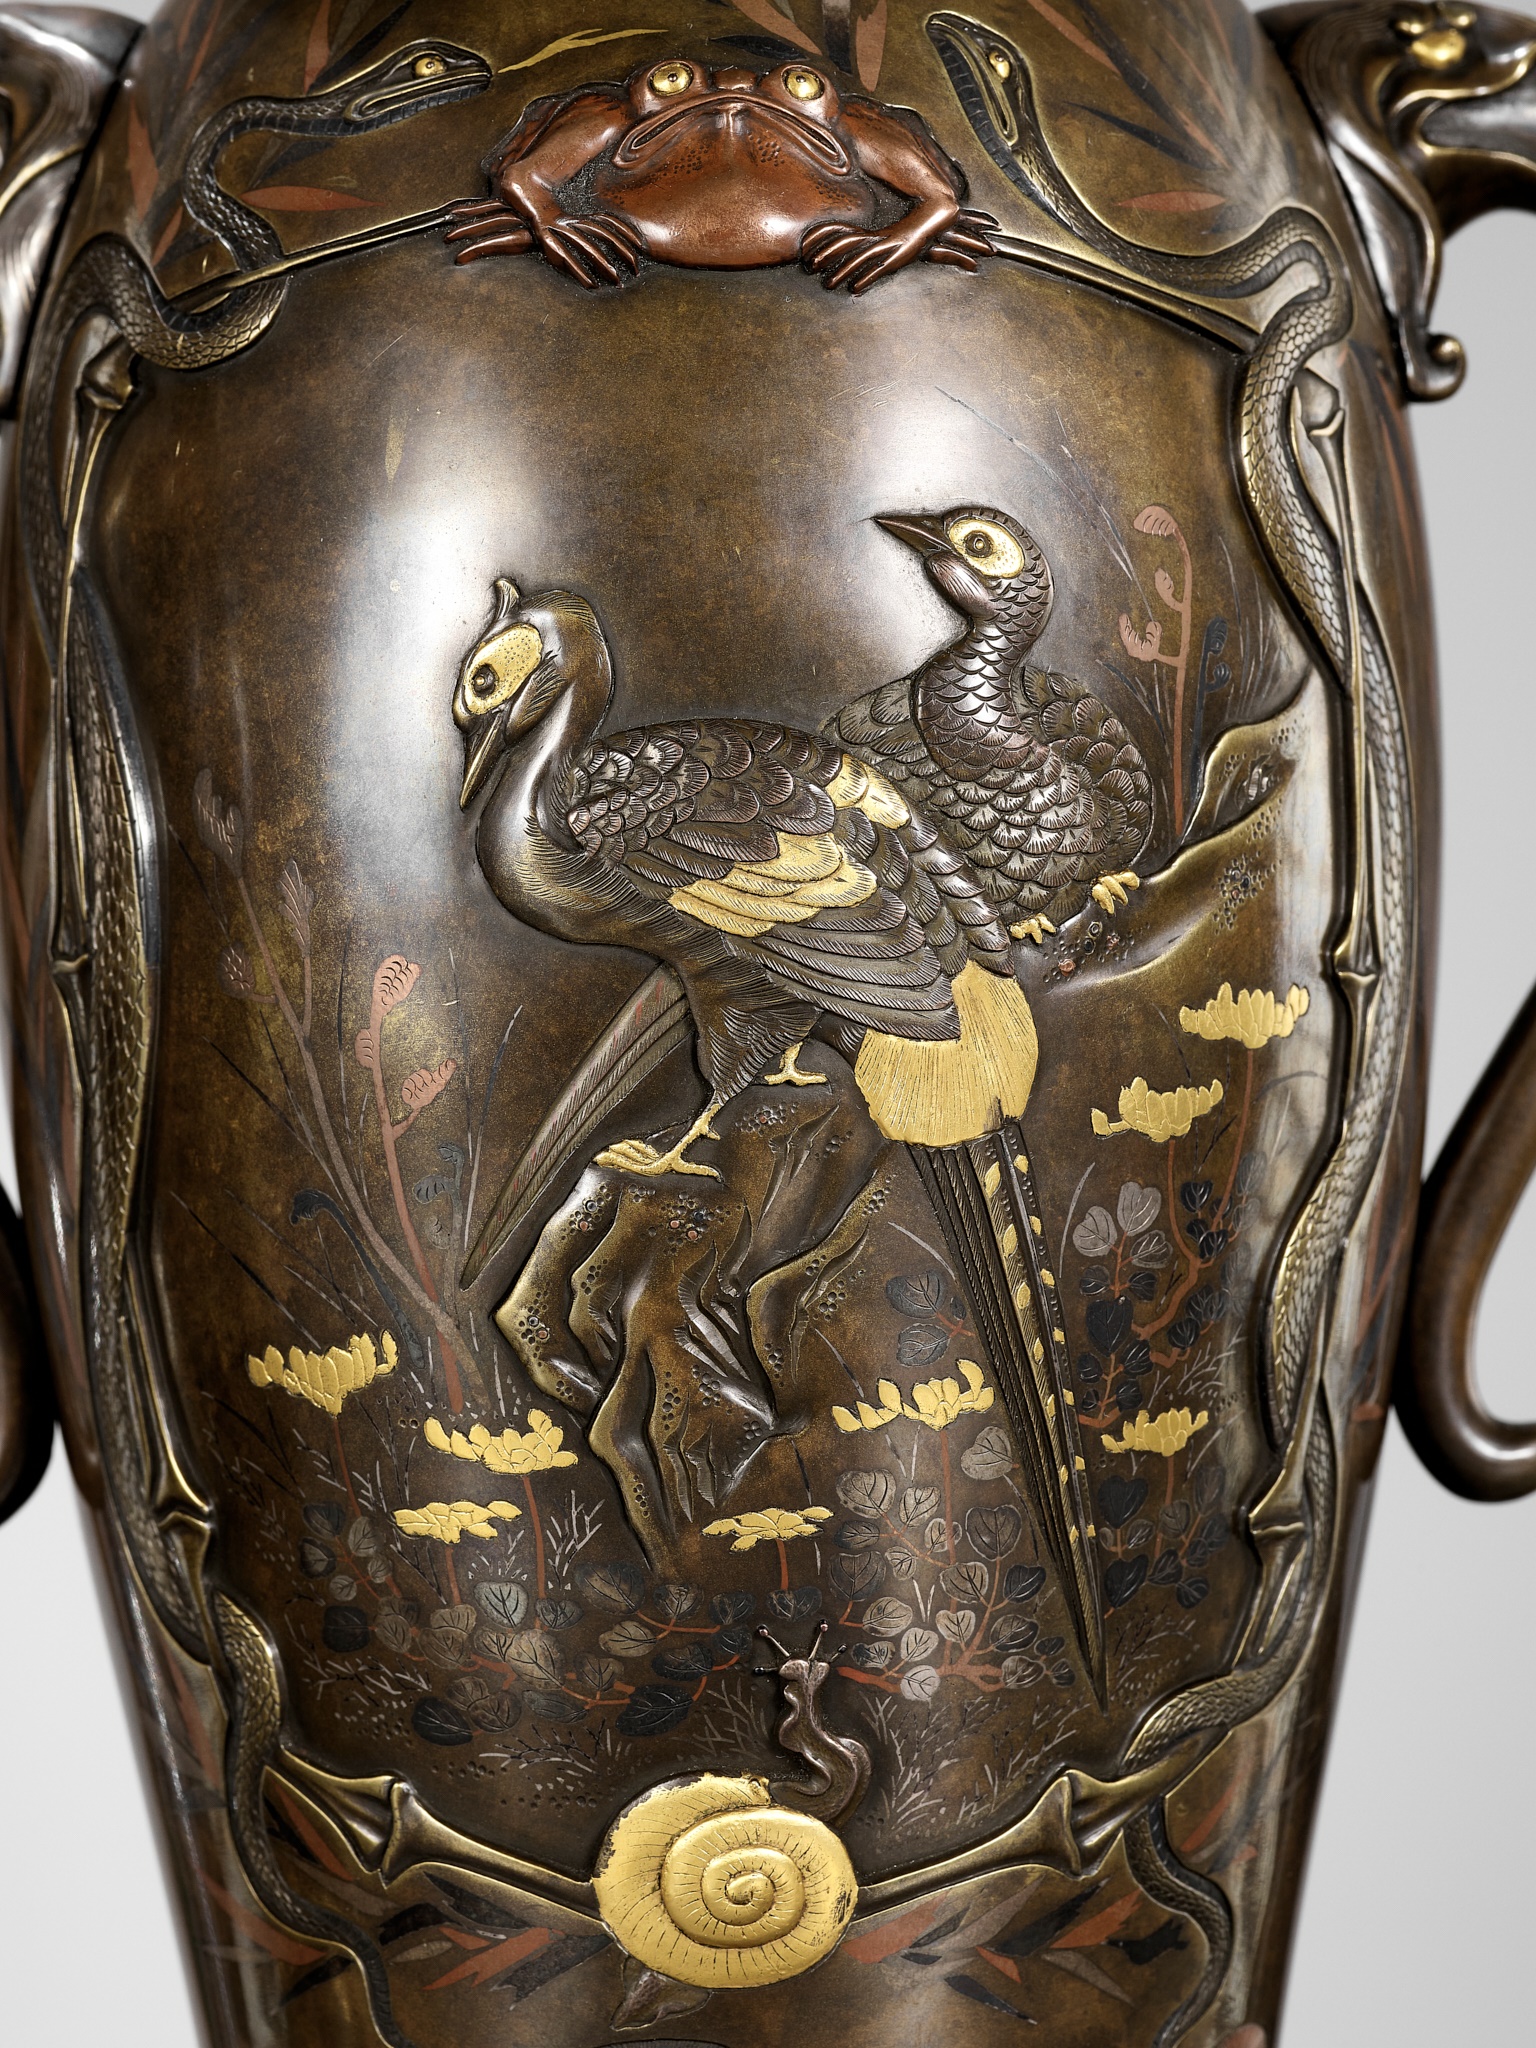 A SUPERB PAIR OF MIYAO-STYLE MIXED-METAL-INLAID AND PARCEL-GILT BRONZE VASES WITH SHOKI AND ONI - Image 4 of 15